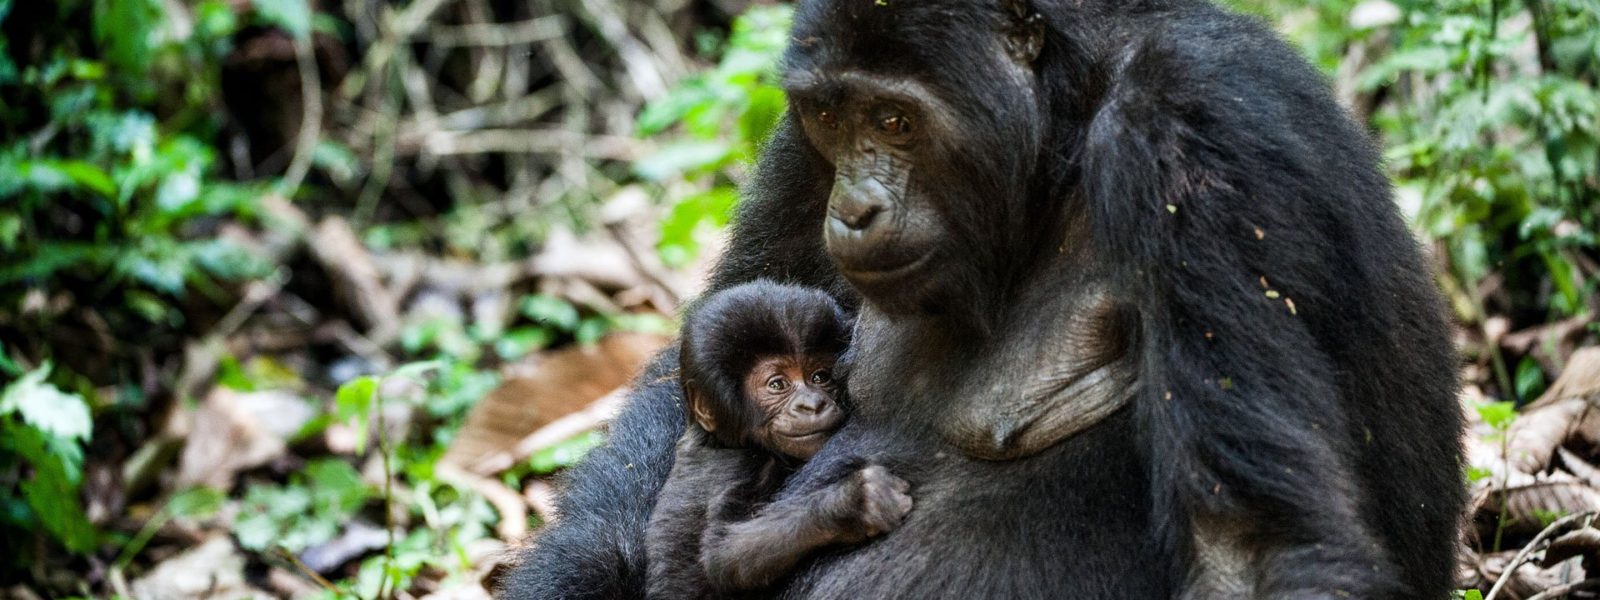 Where to go See Gorillas in Africa